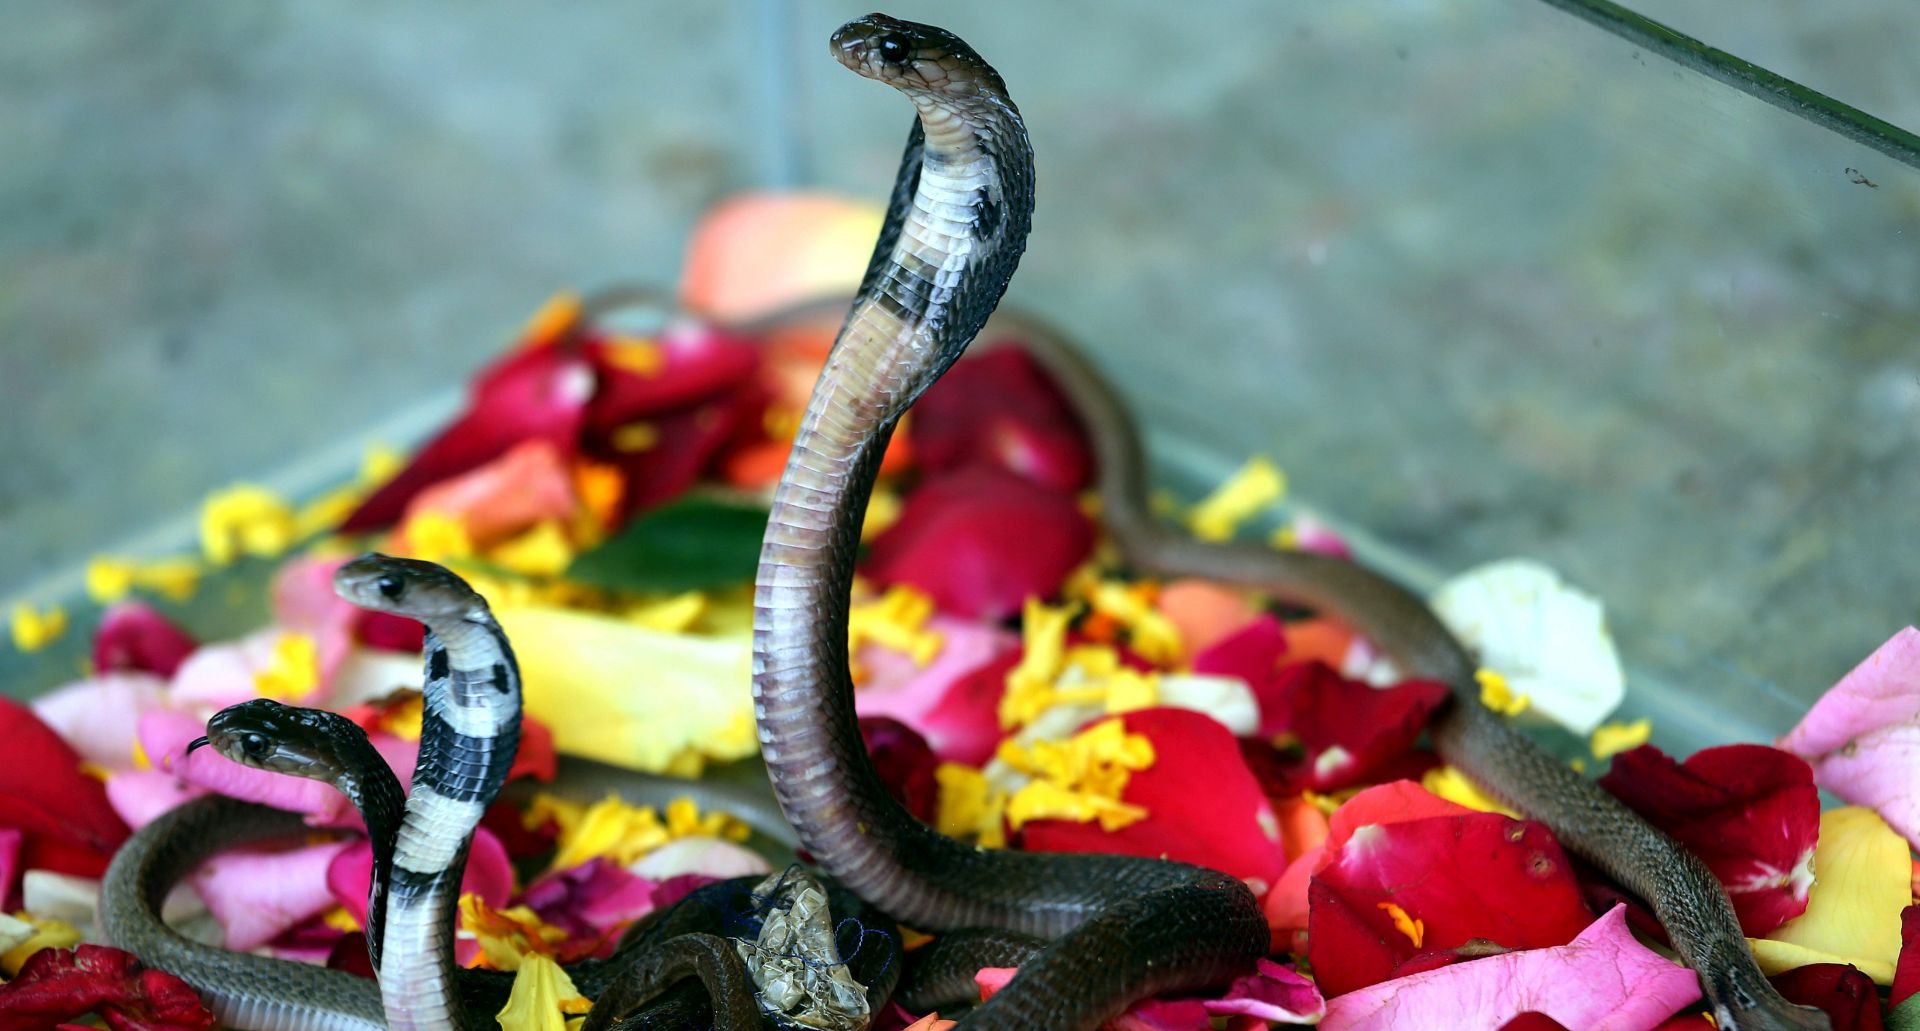 epa04888263 A view of baby cobras at the rescue center on the eve of Nagpanchami festival in Bhopal, India, 18 August 2015. Nagpanchami is a traditional festival which is celebrated on the fifth day of the moonlit-fortnight in the holy month of 'Shravan' which falls in the months of July and August. People worship snakes and offer them milk during this festival.  EPA/SANJEEV GUPTA